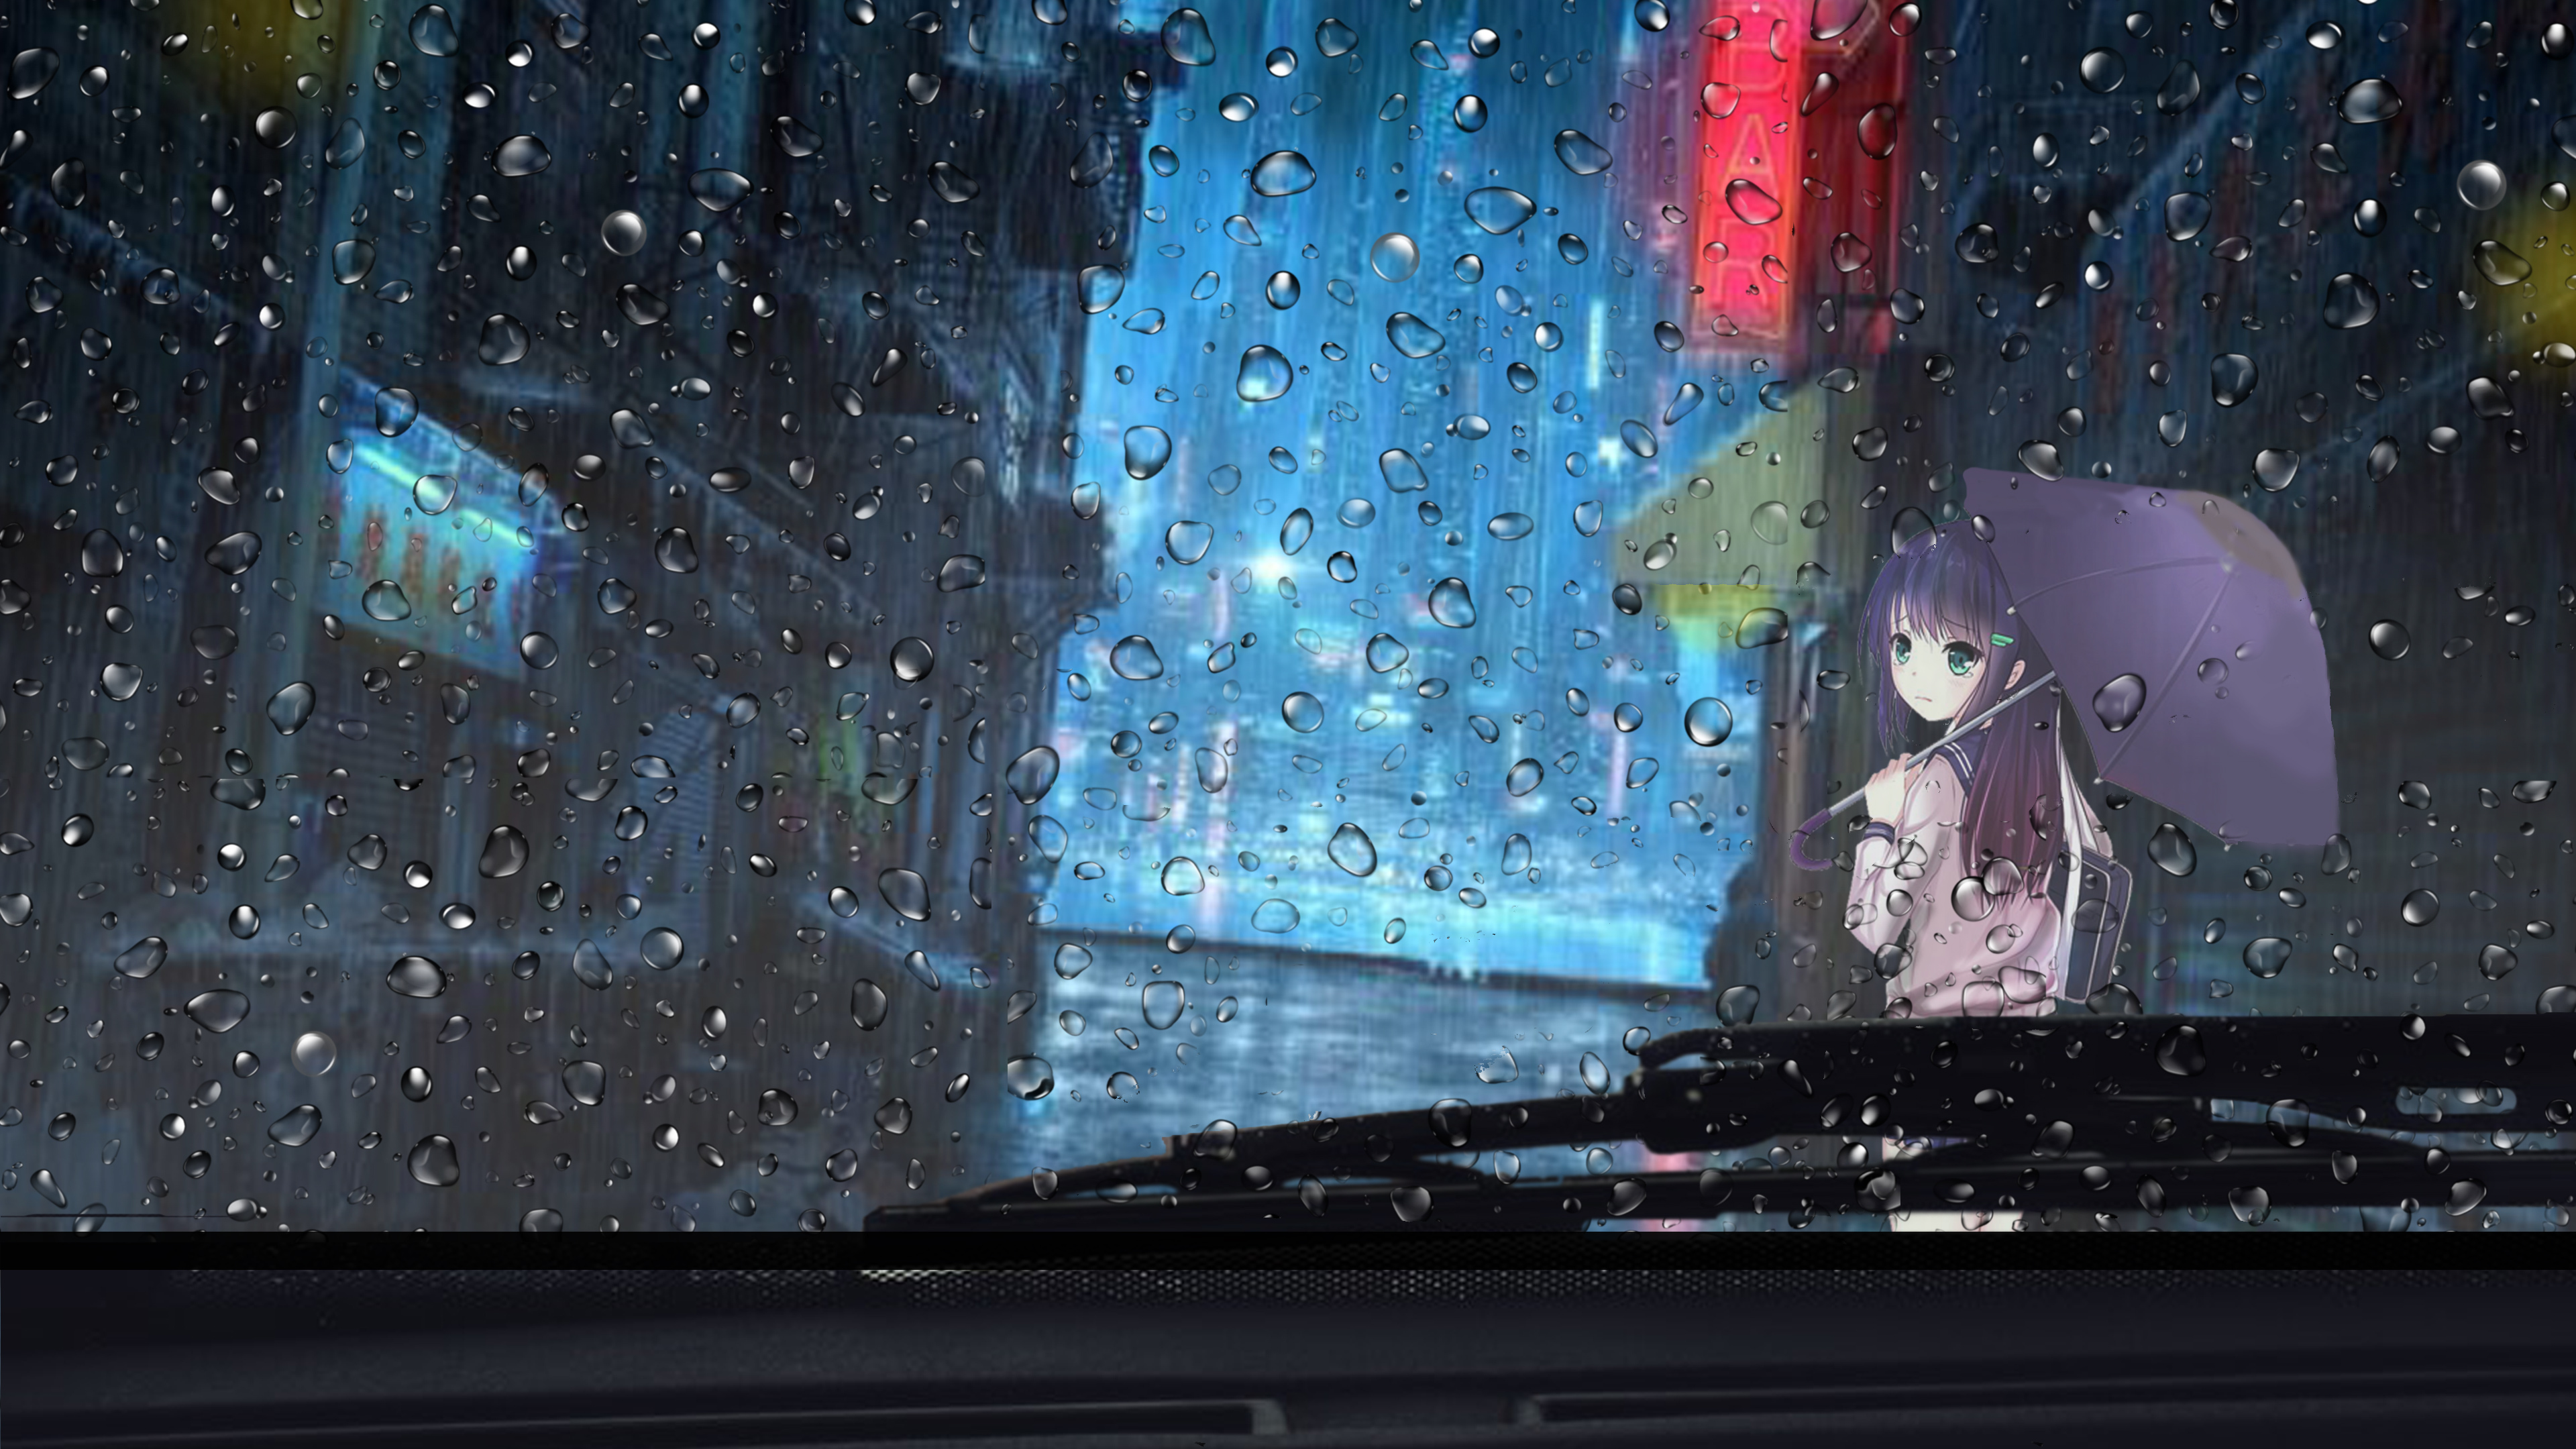 3840x2160 Anime Girl Rainy Day View From Car 4k 4k HD 4k Wallpapers, Image,...